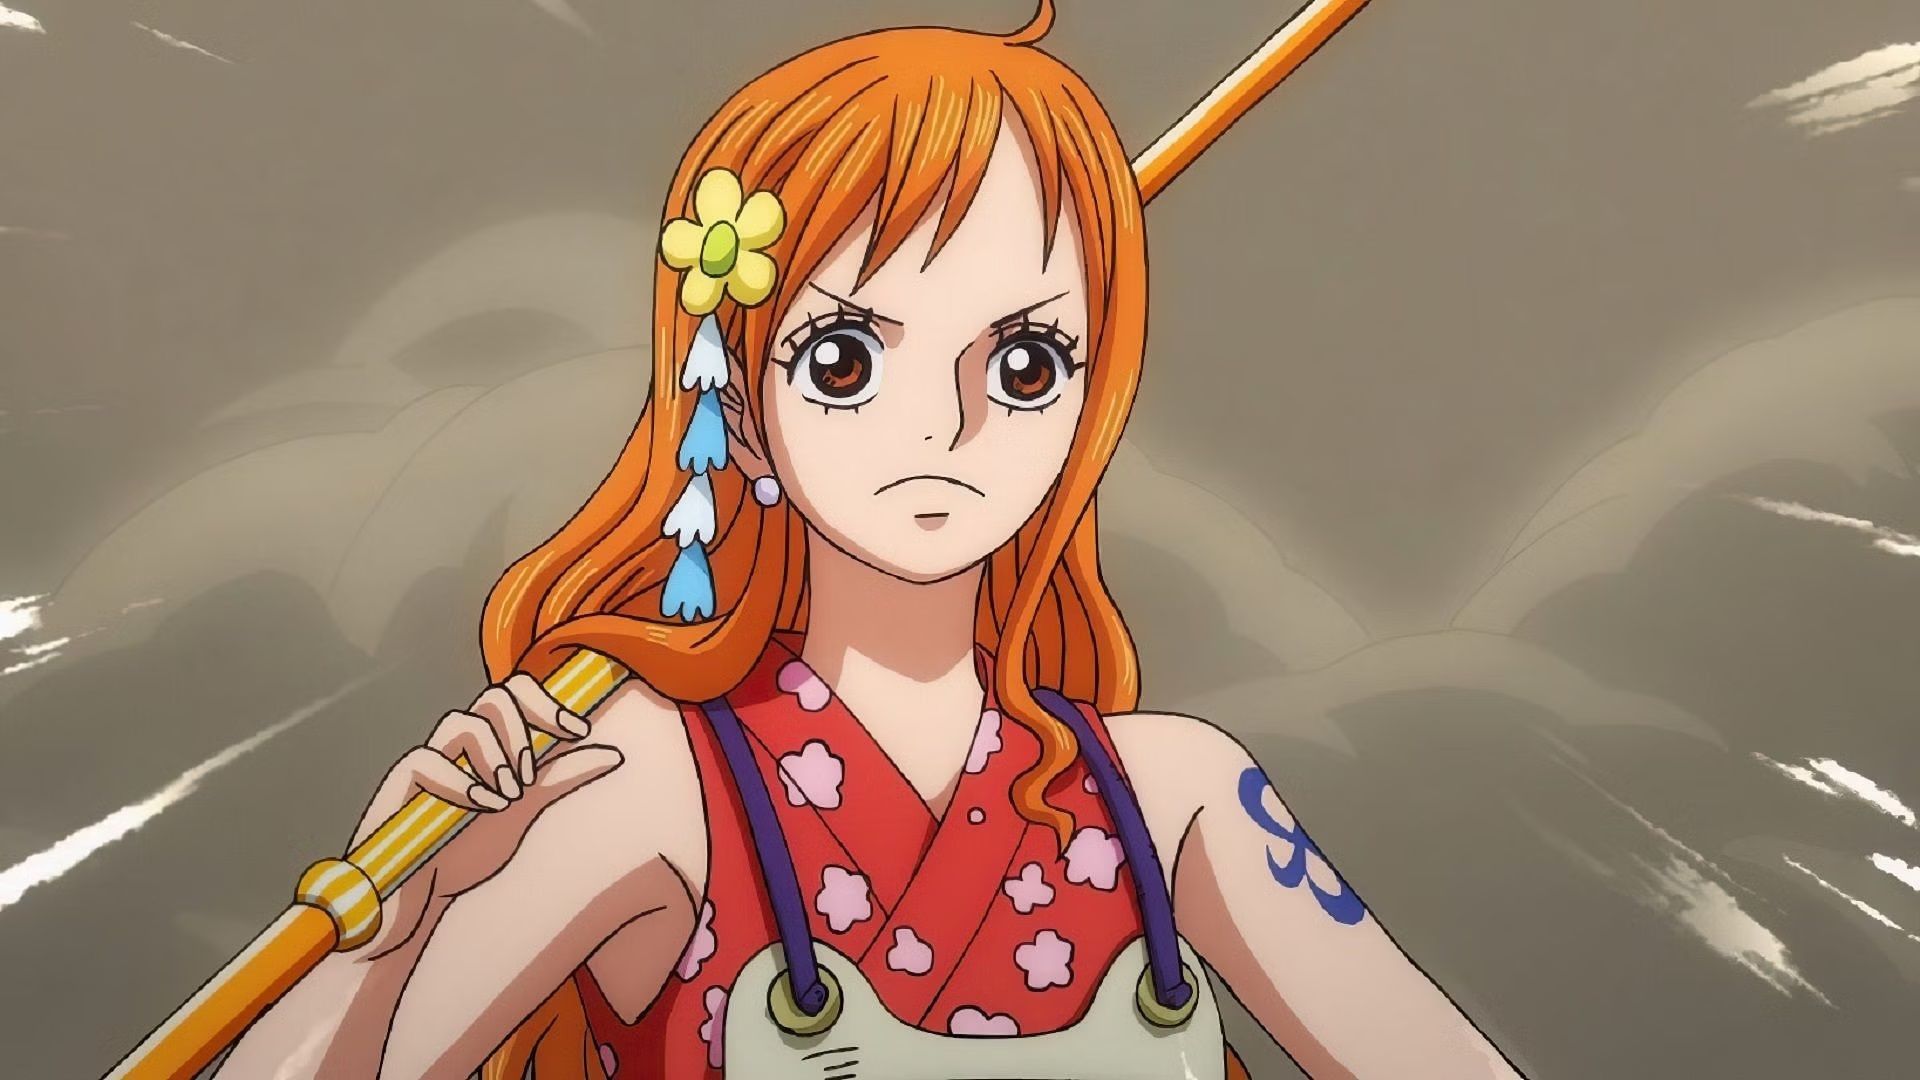 nami in her red wano outfit while carrying a staff